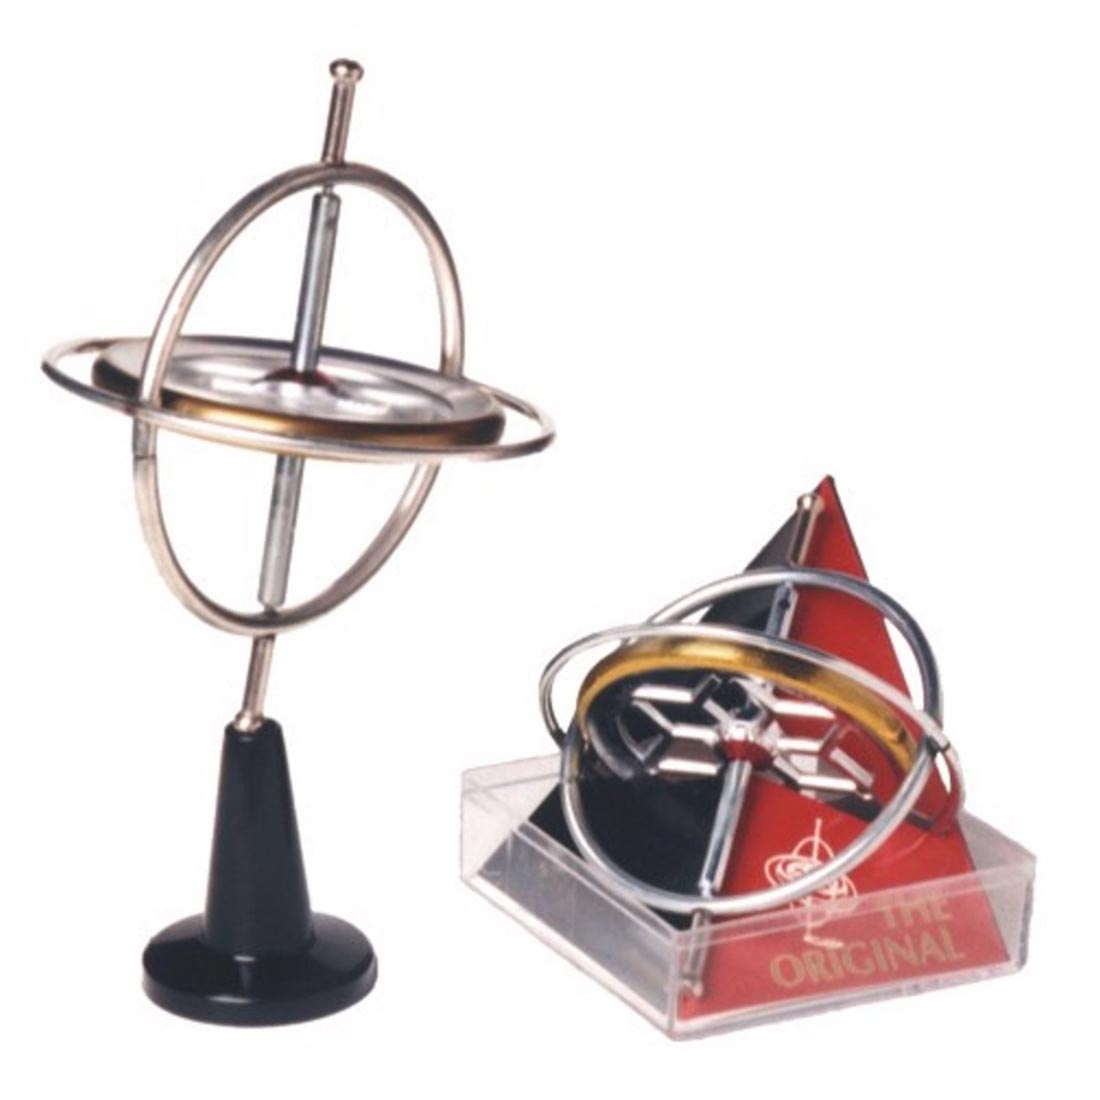 Tedco Scientific Gyroscope shown both in use and in package